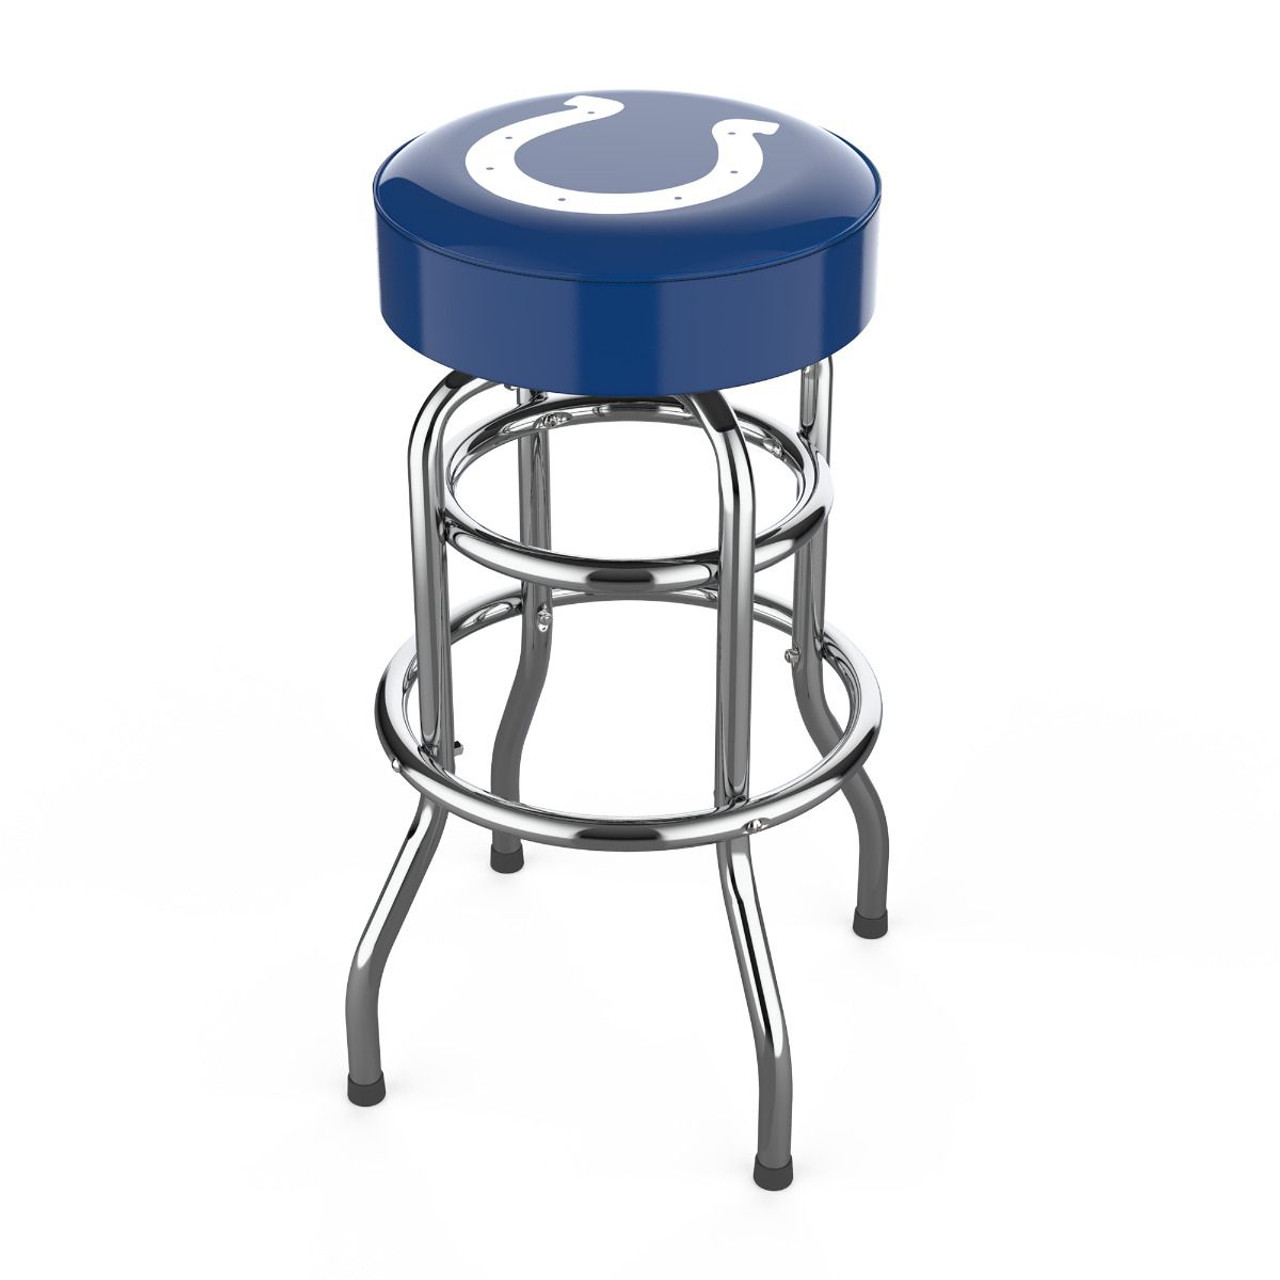 Ind, Indy, Indianapolis, Colts, 30", Chrome, Bar, Stool, 680-1022, 26-1001, NFL, Imperial, 720801324111